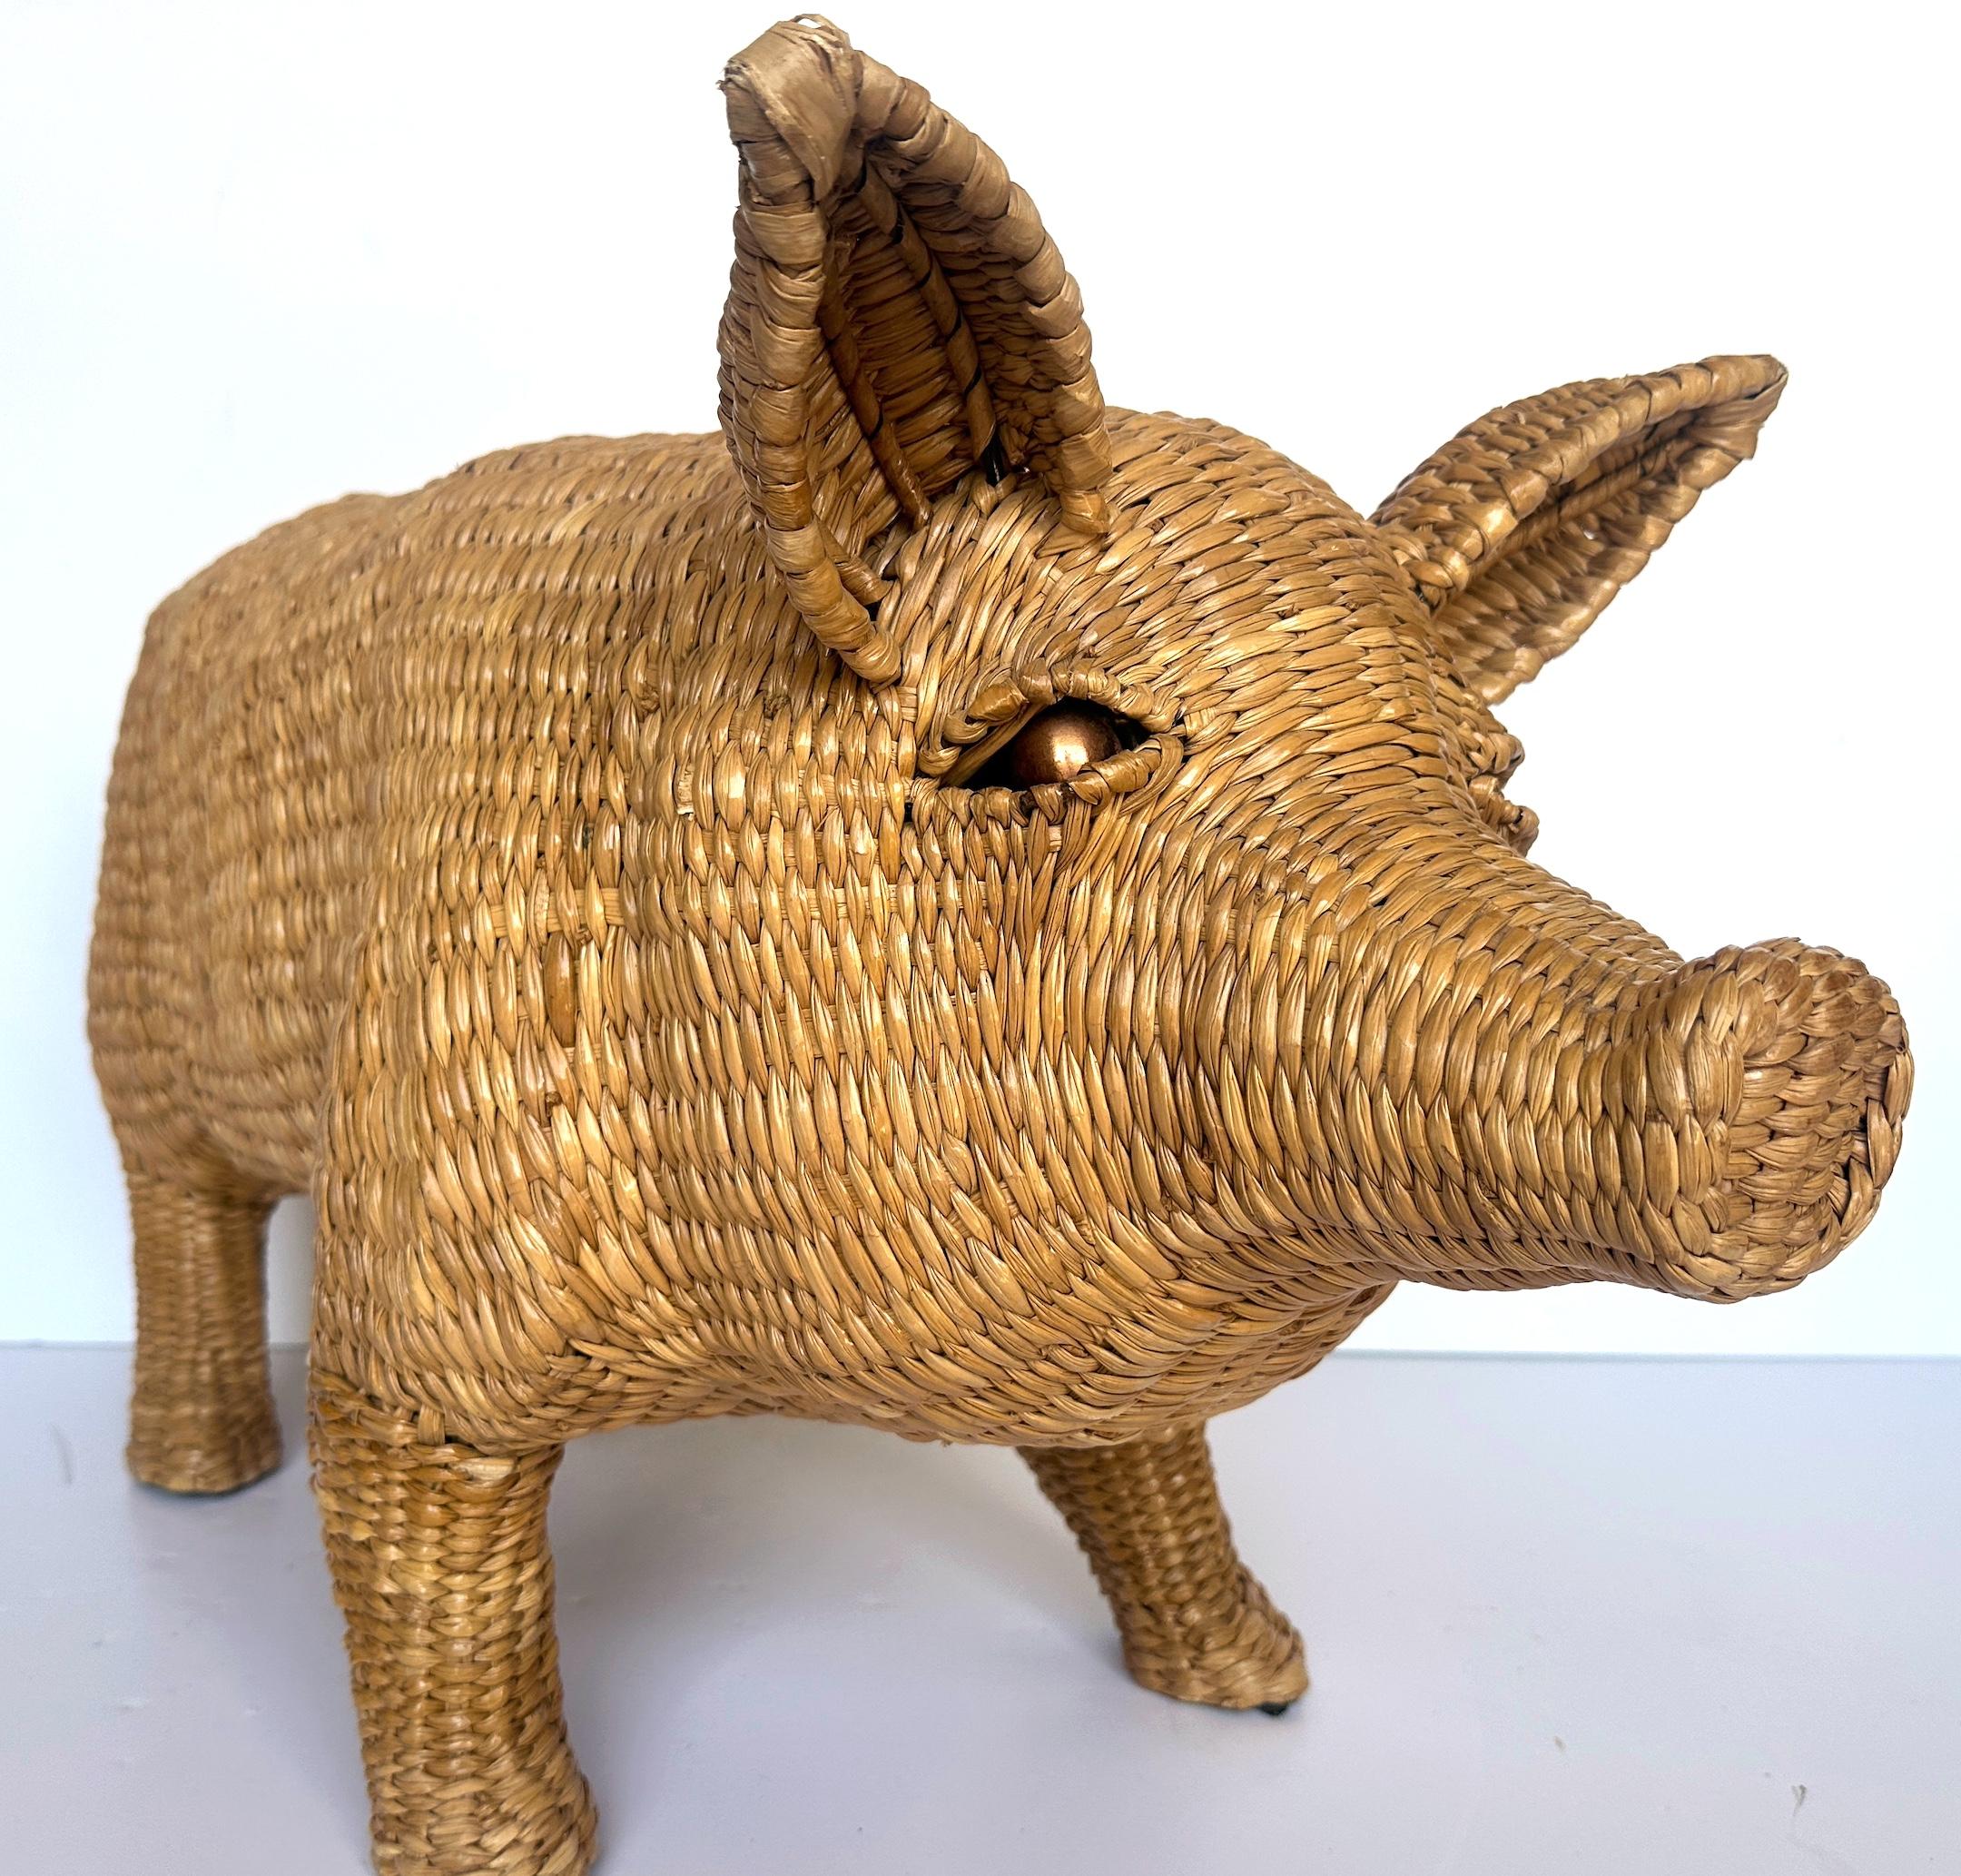 Patinated Mario Lopez Torres Pig Sculpture, Signed c. 1970s For Sale